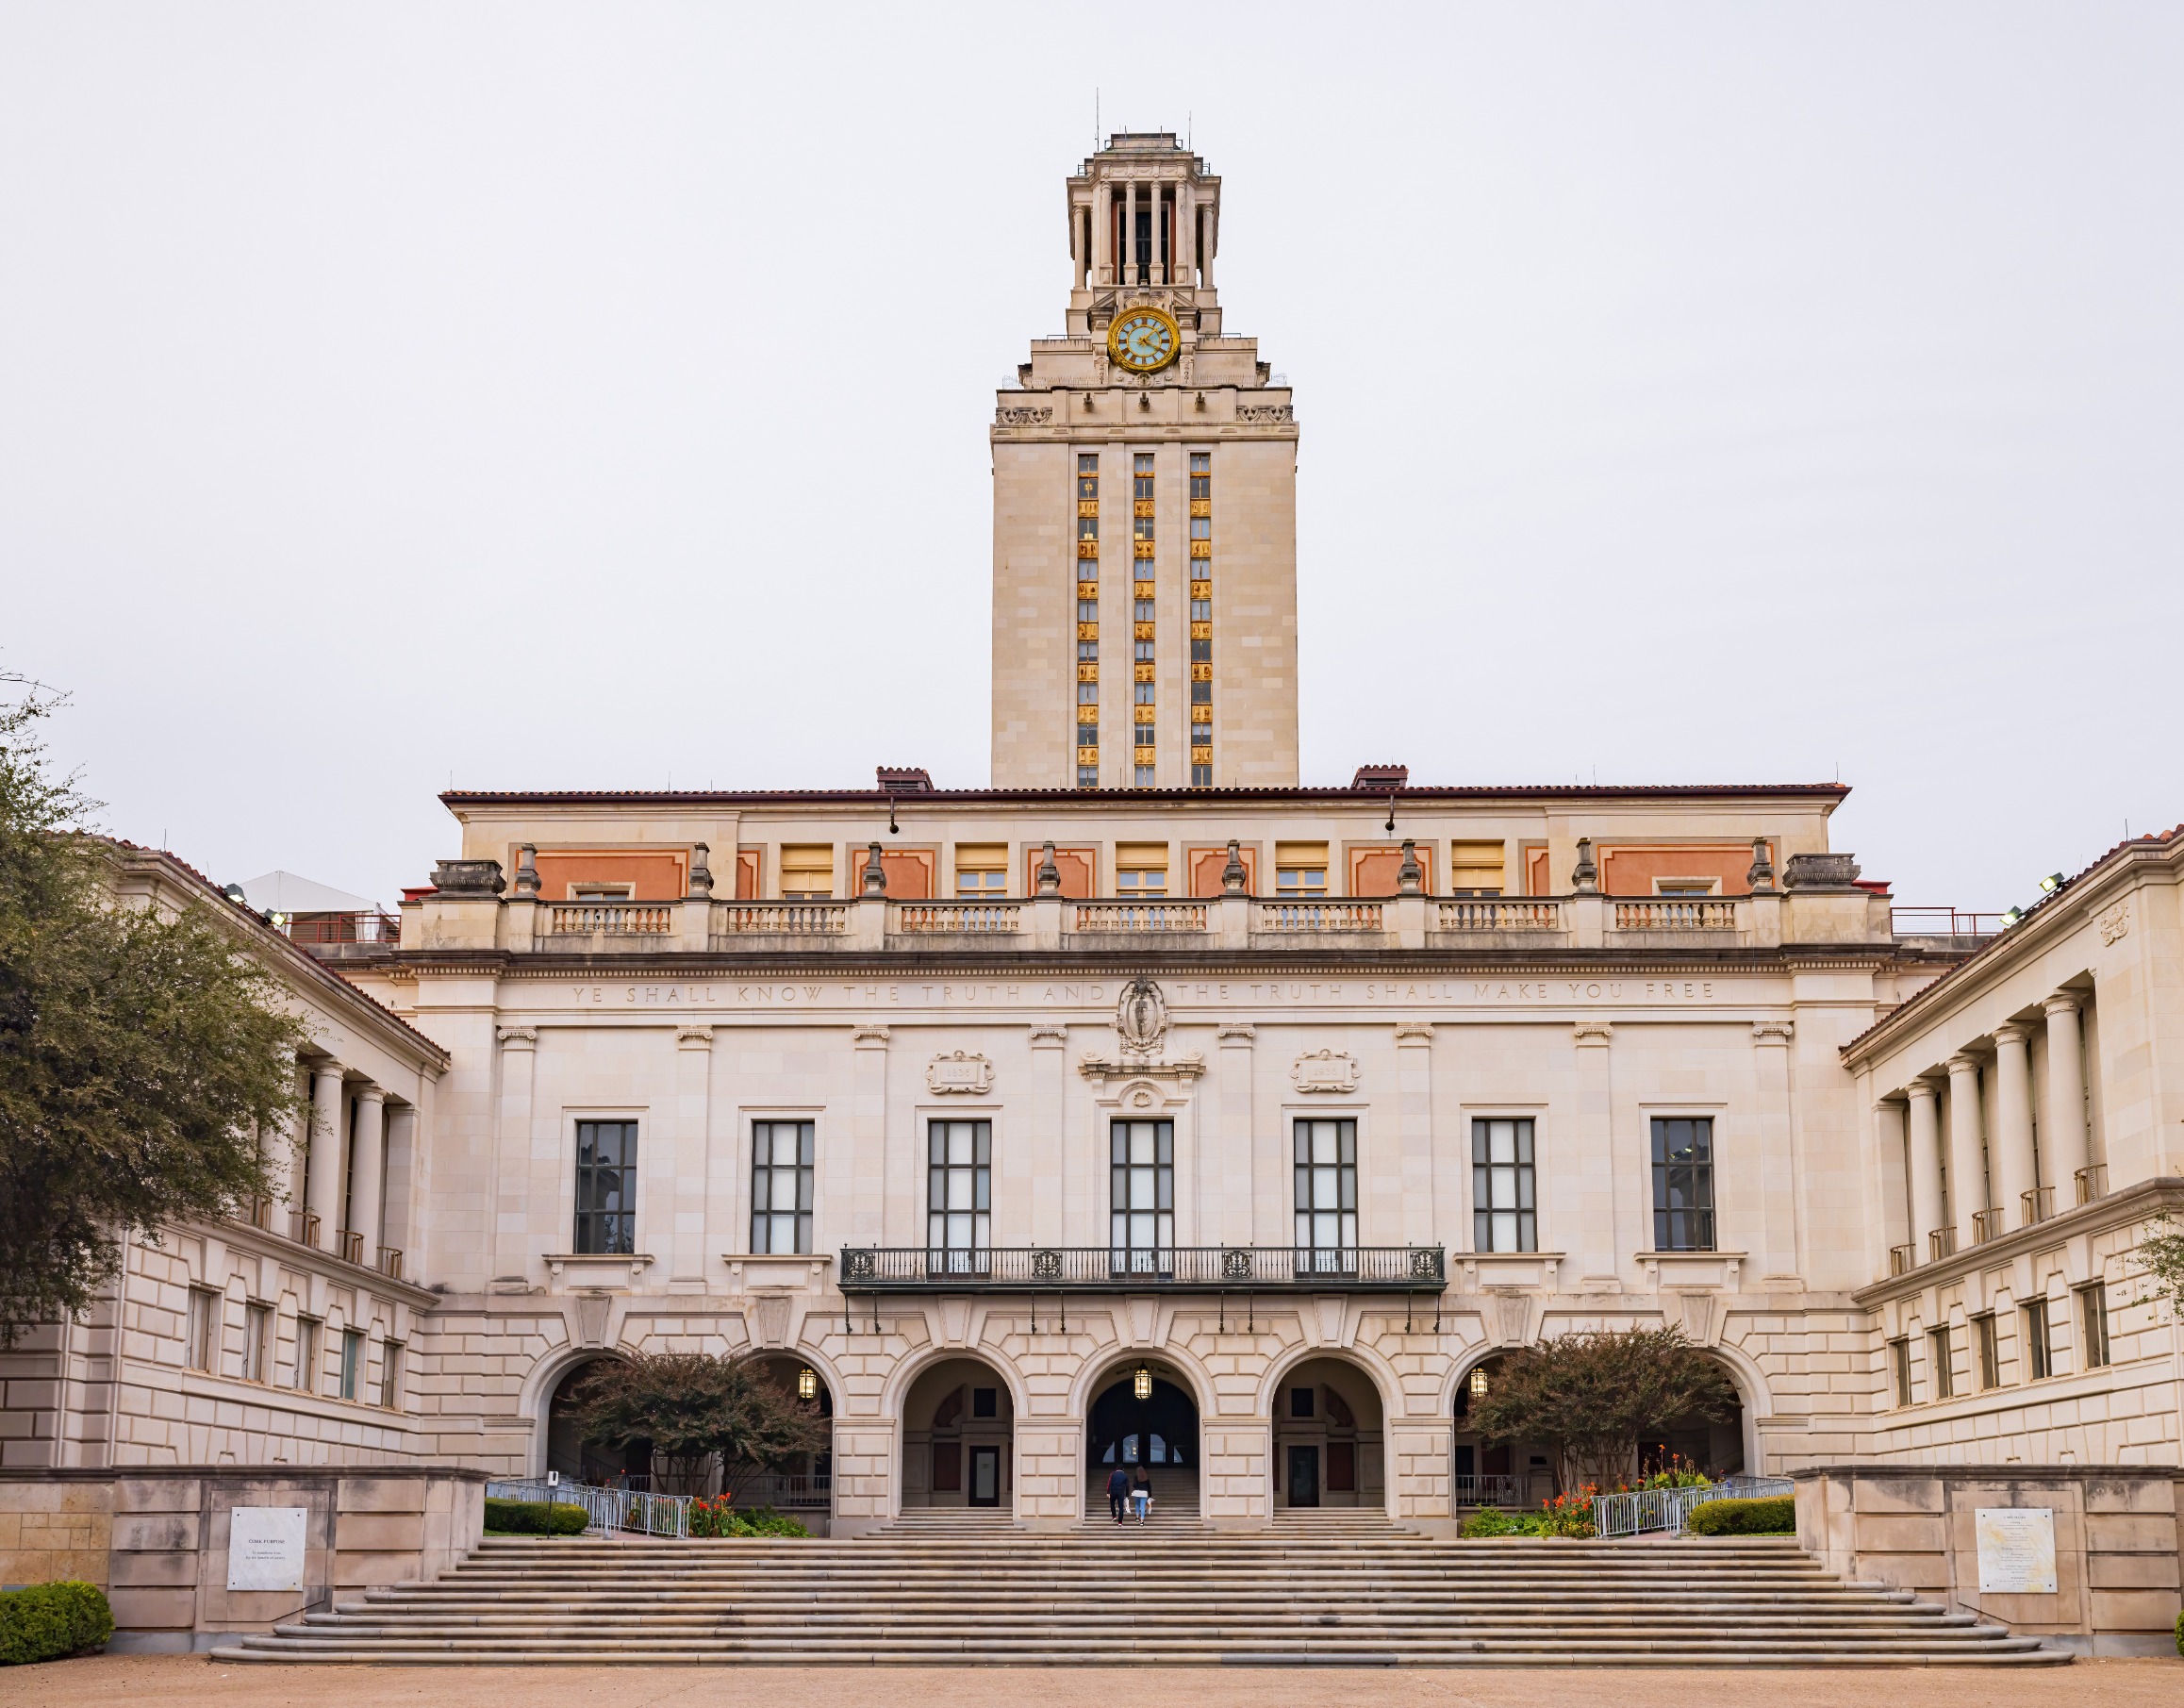 A picture of a UT tower, a prominent clock tower at The University of Texas at Austin. UT Austin offers a fully funded Master's in School Psychology.